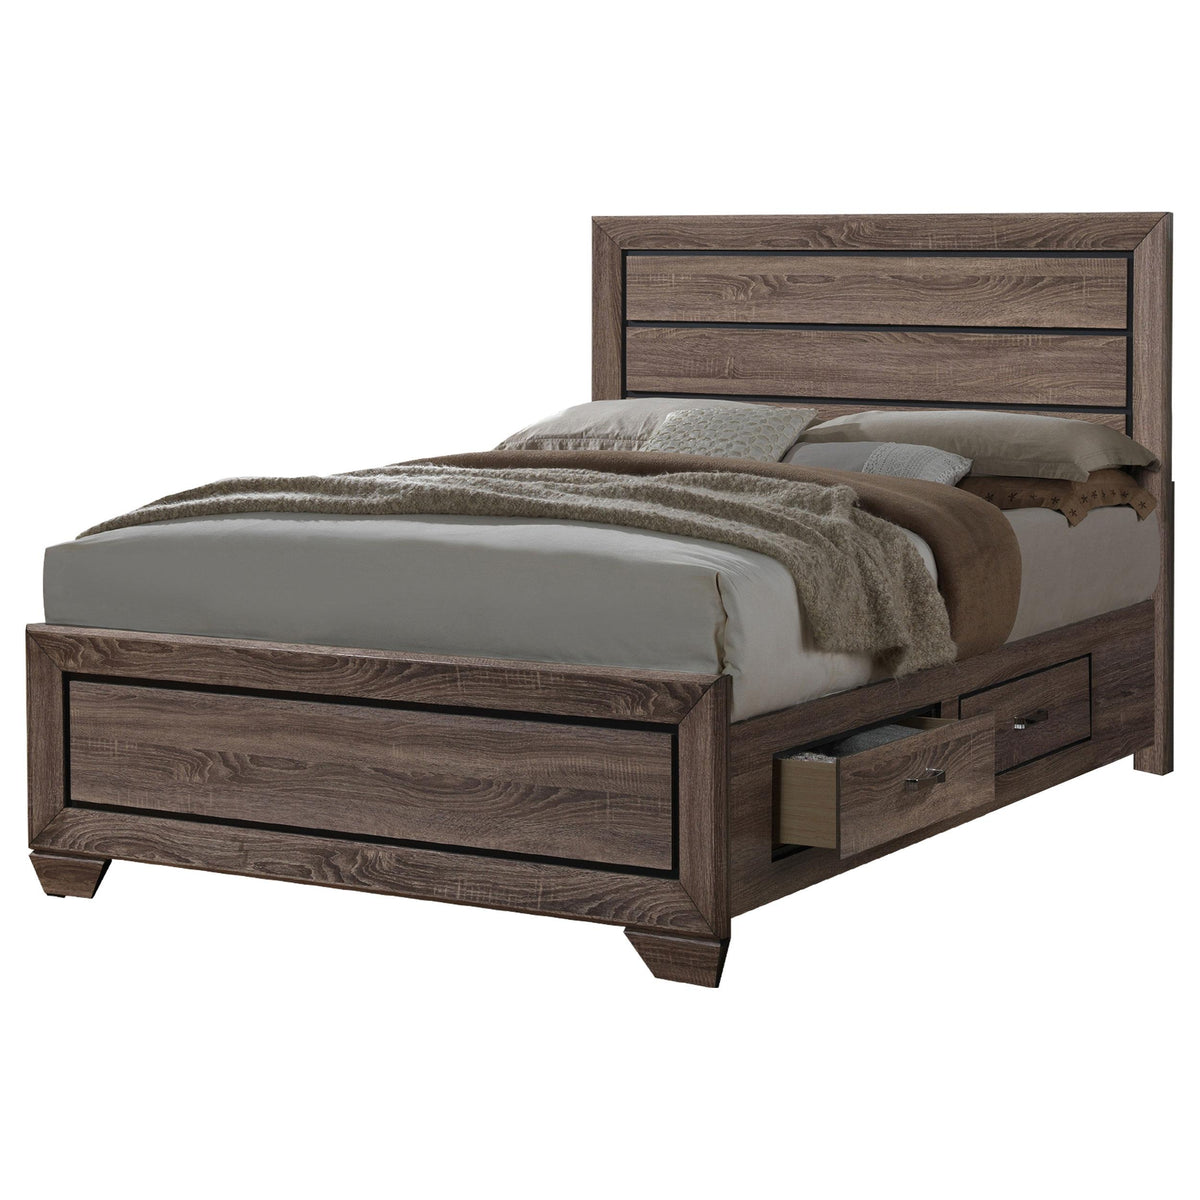 Kauffman Queen Storage Bed Washed Taupe Kauffman Queen Storage Bed Washed Taupe Half Price Furniture